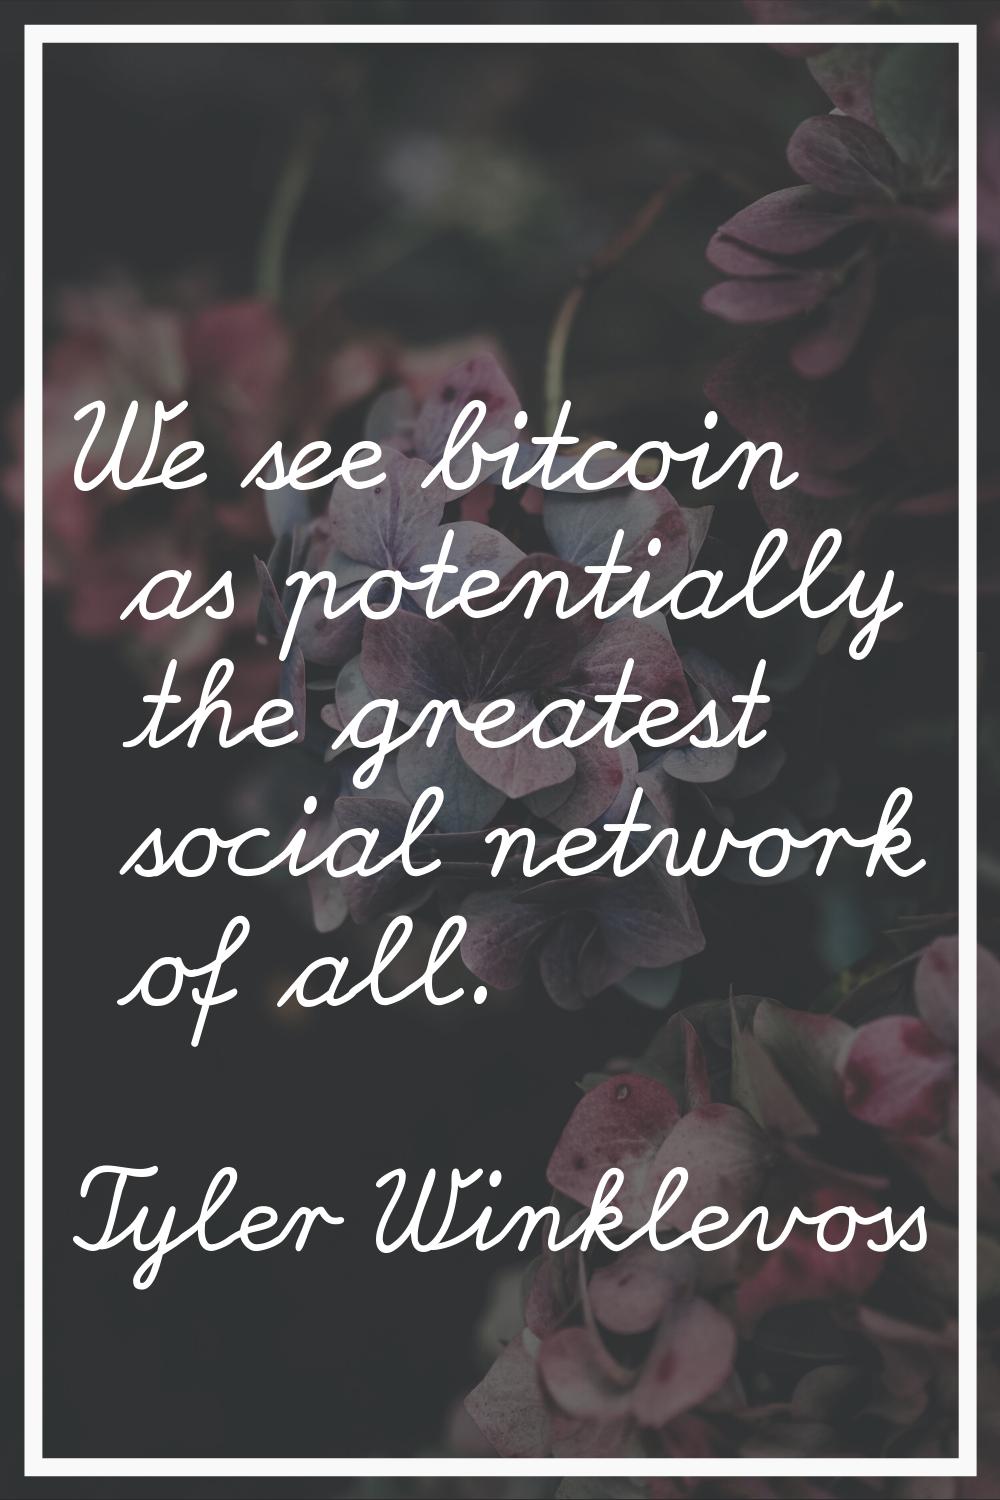 We see bitcoin as potentially the greatest social network of all.